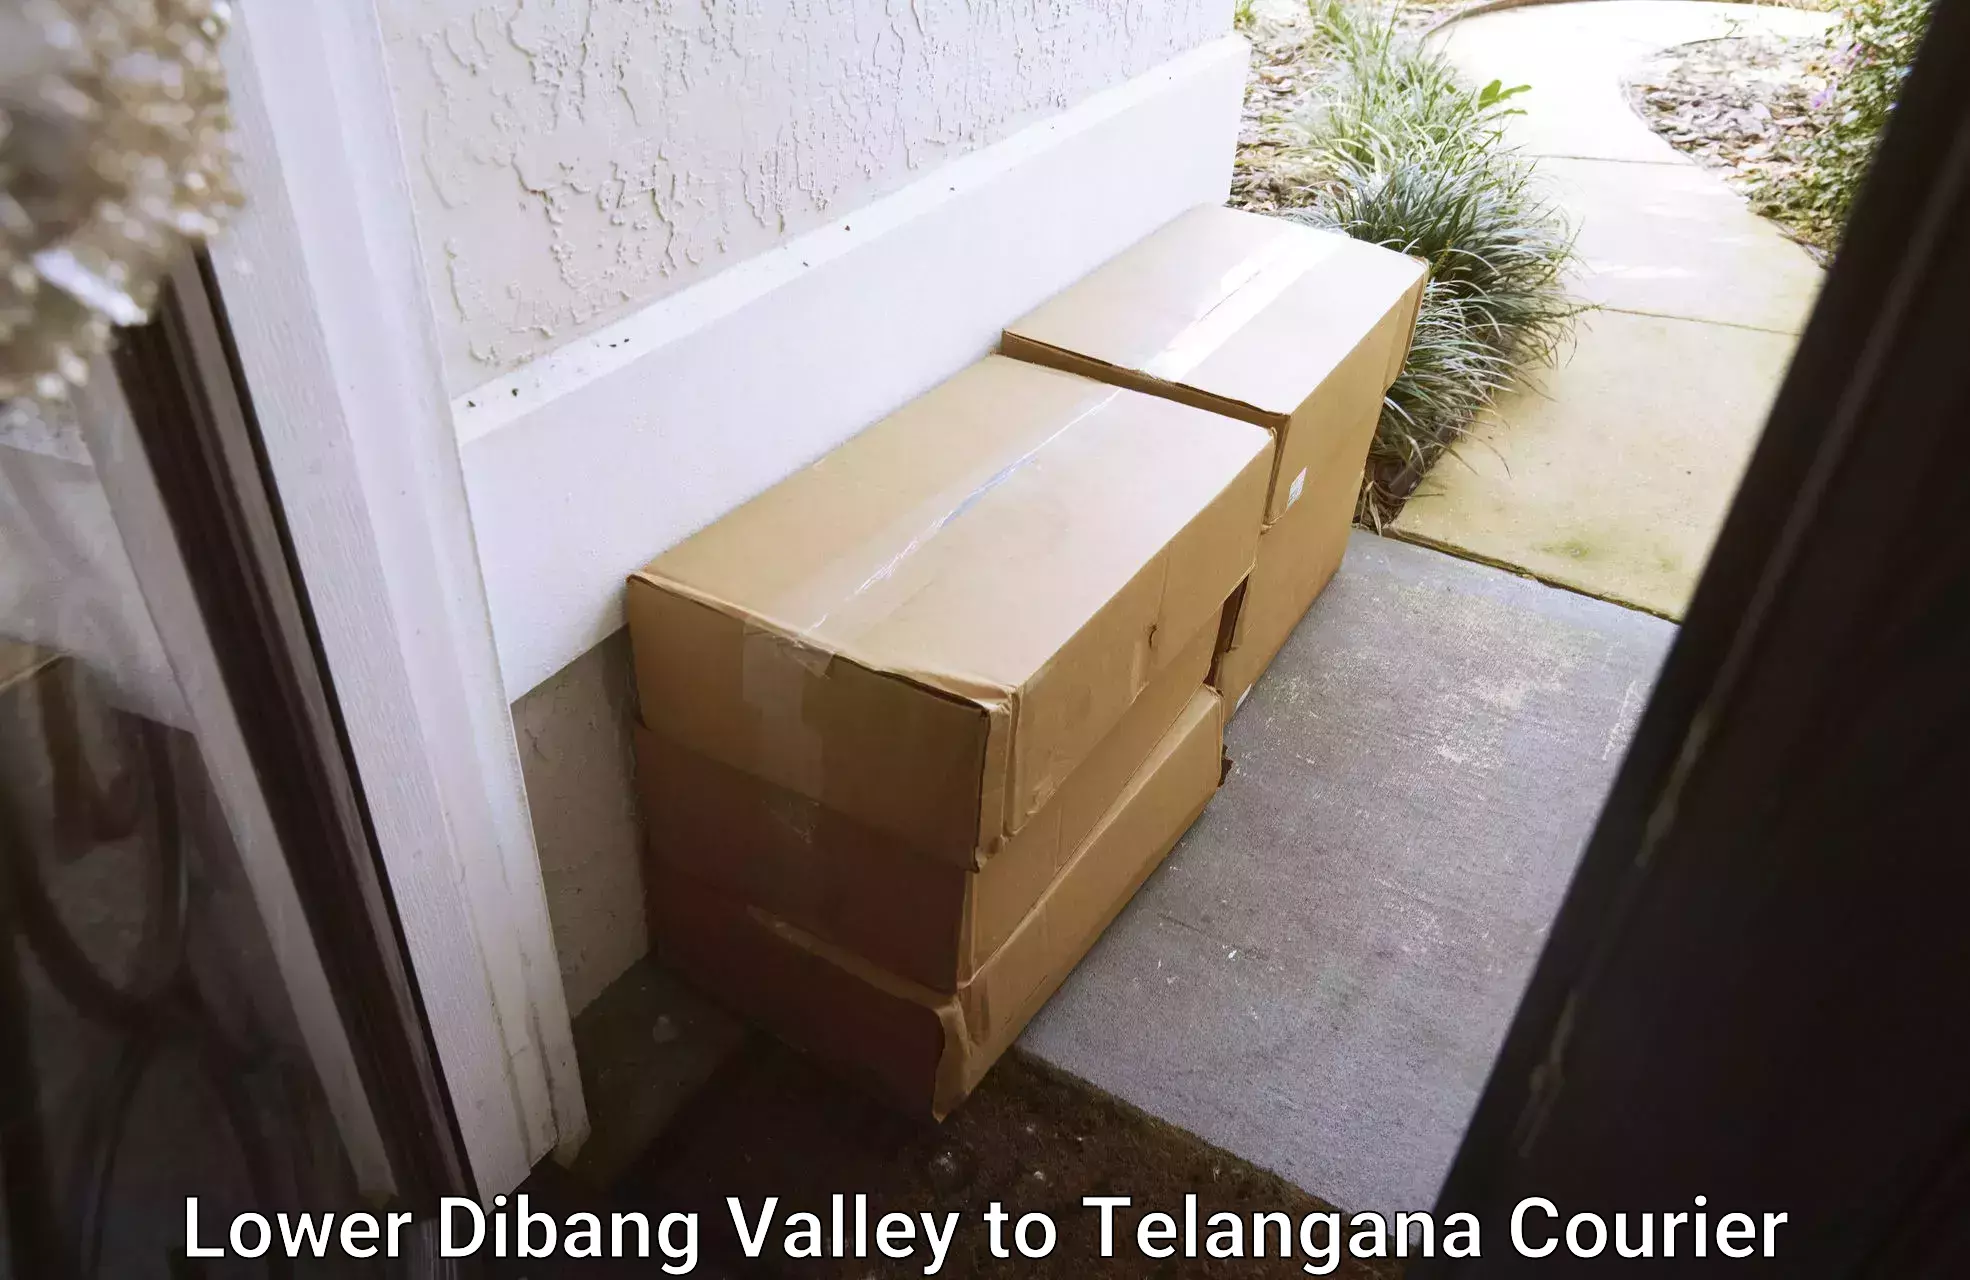 Speedy delivery service in Lower Dibang Valley to Gollapalli